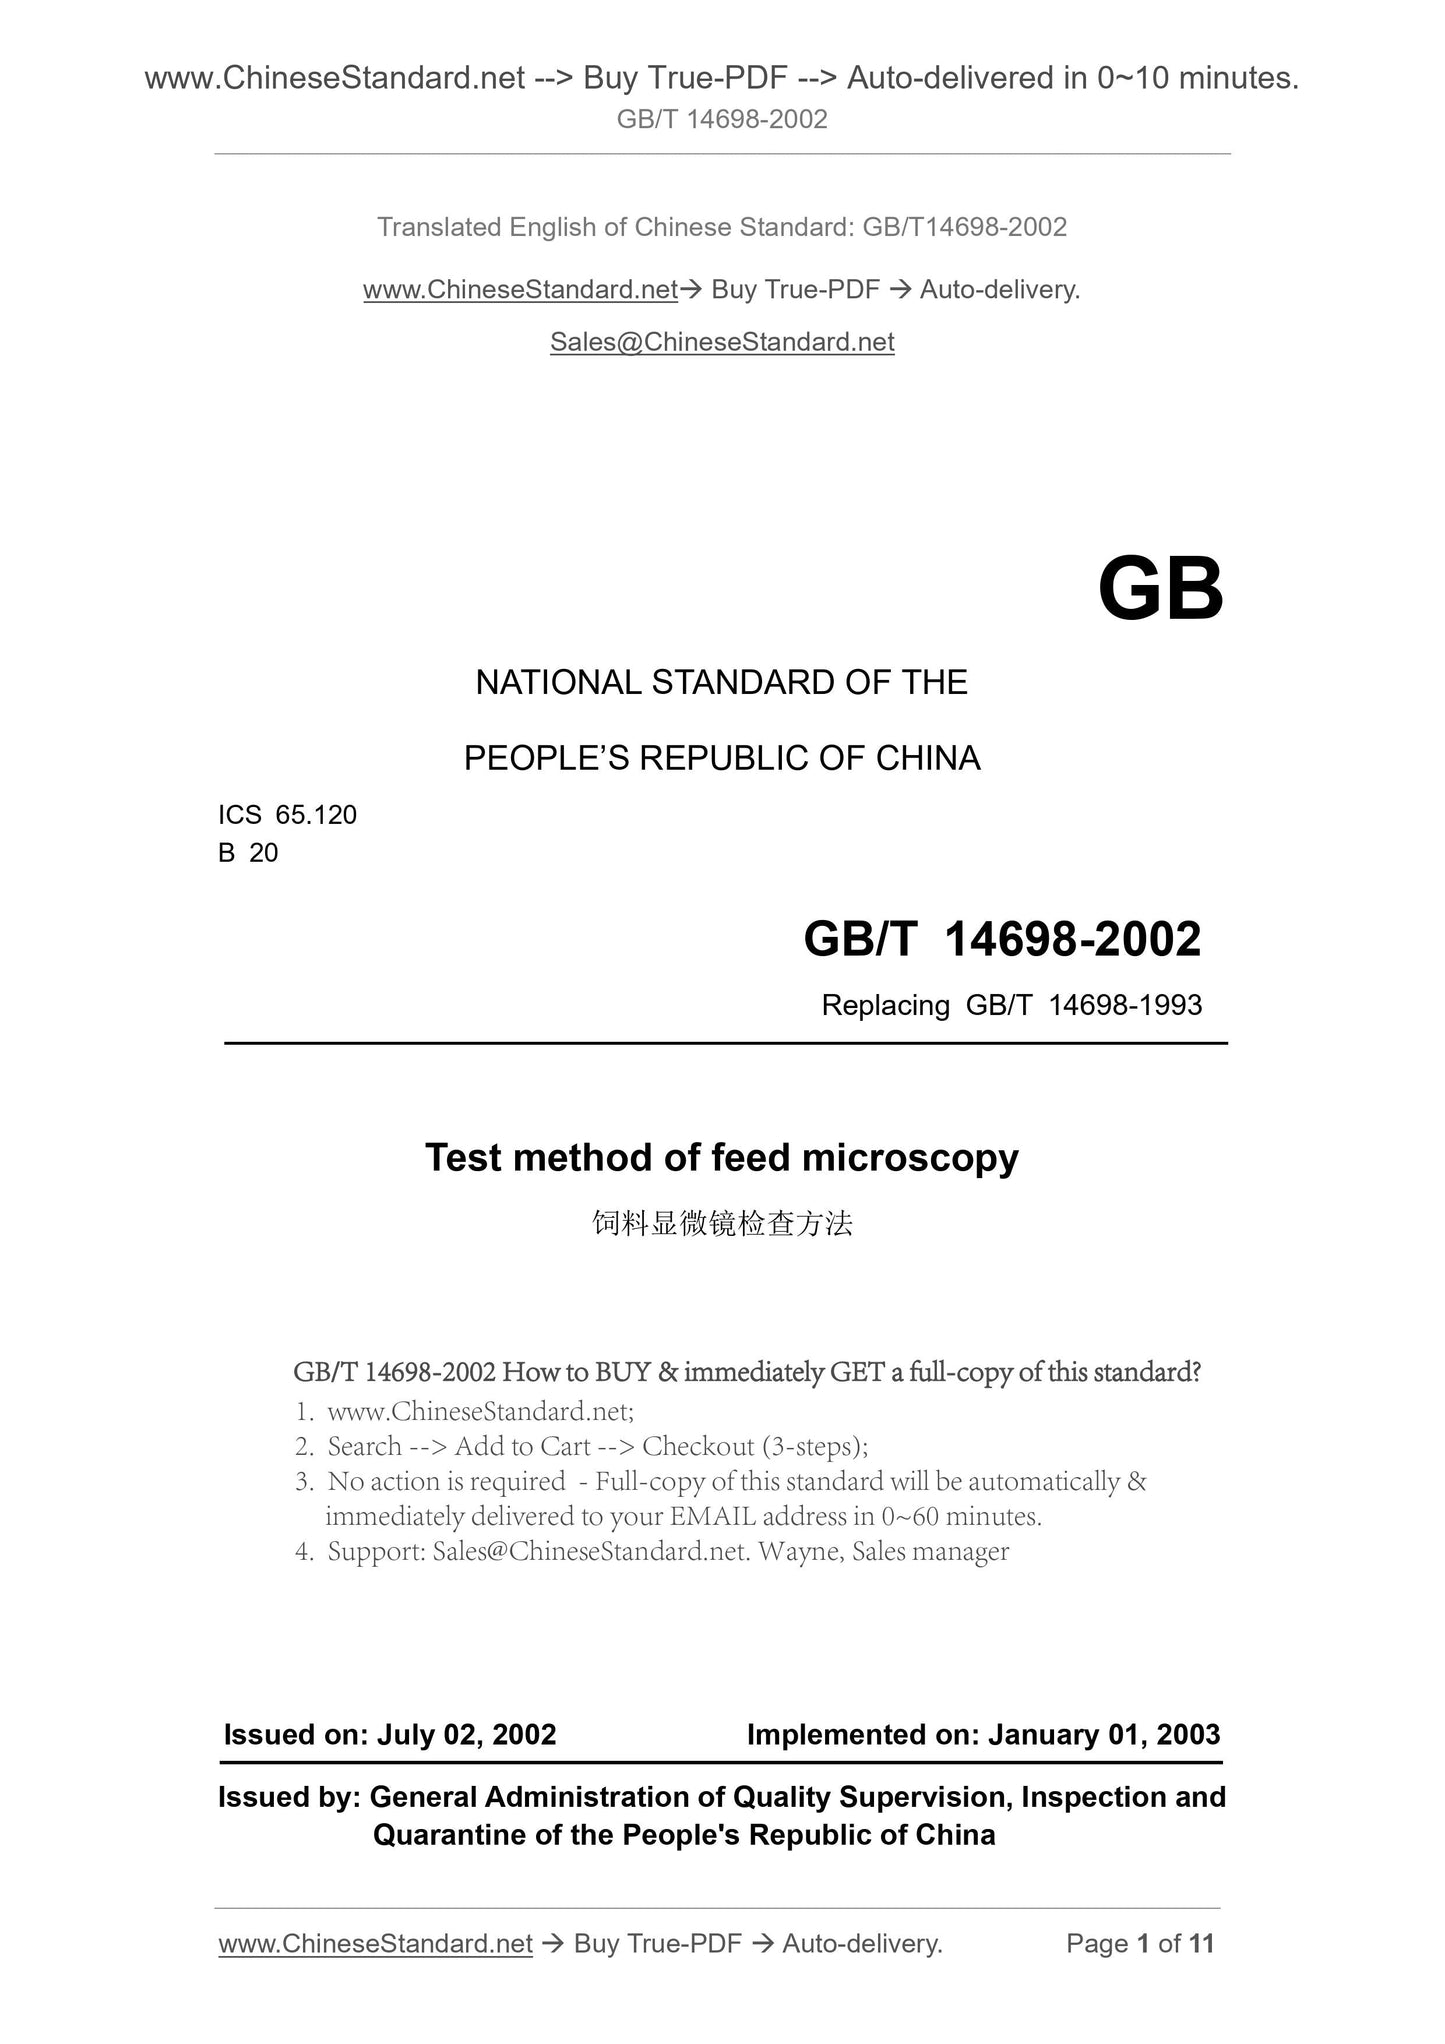 GB/T 14698-2002 Page 1